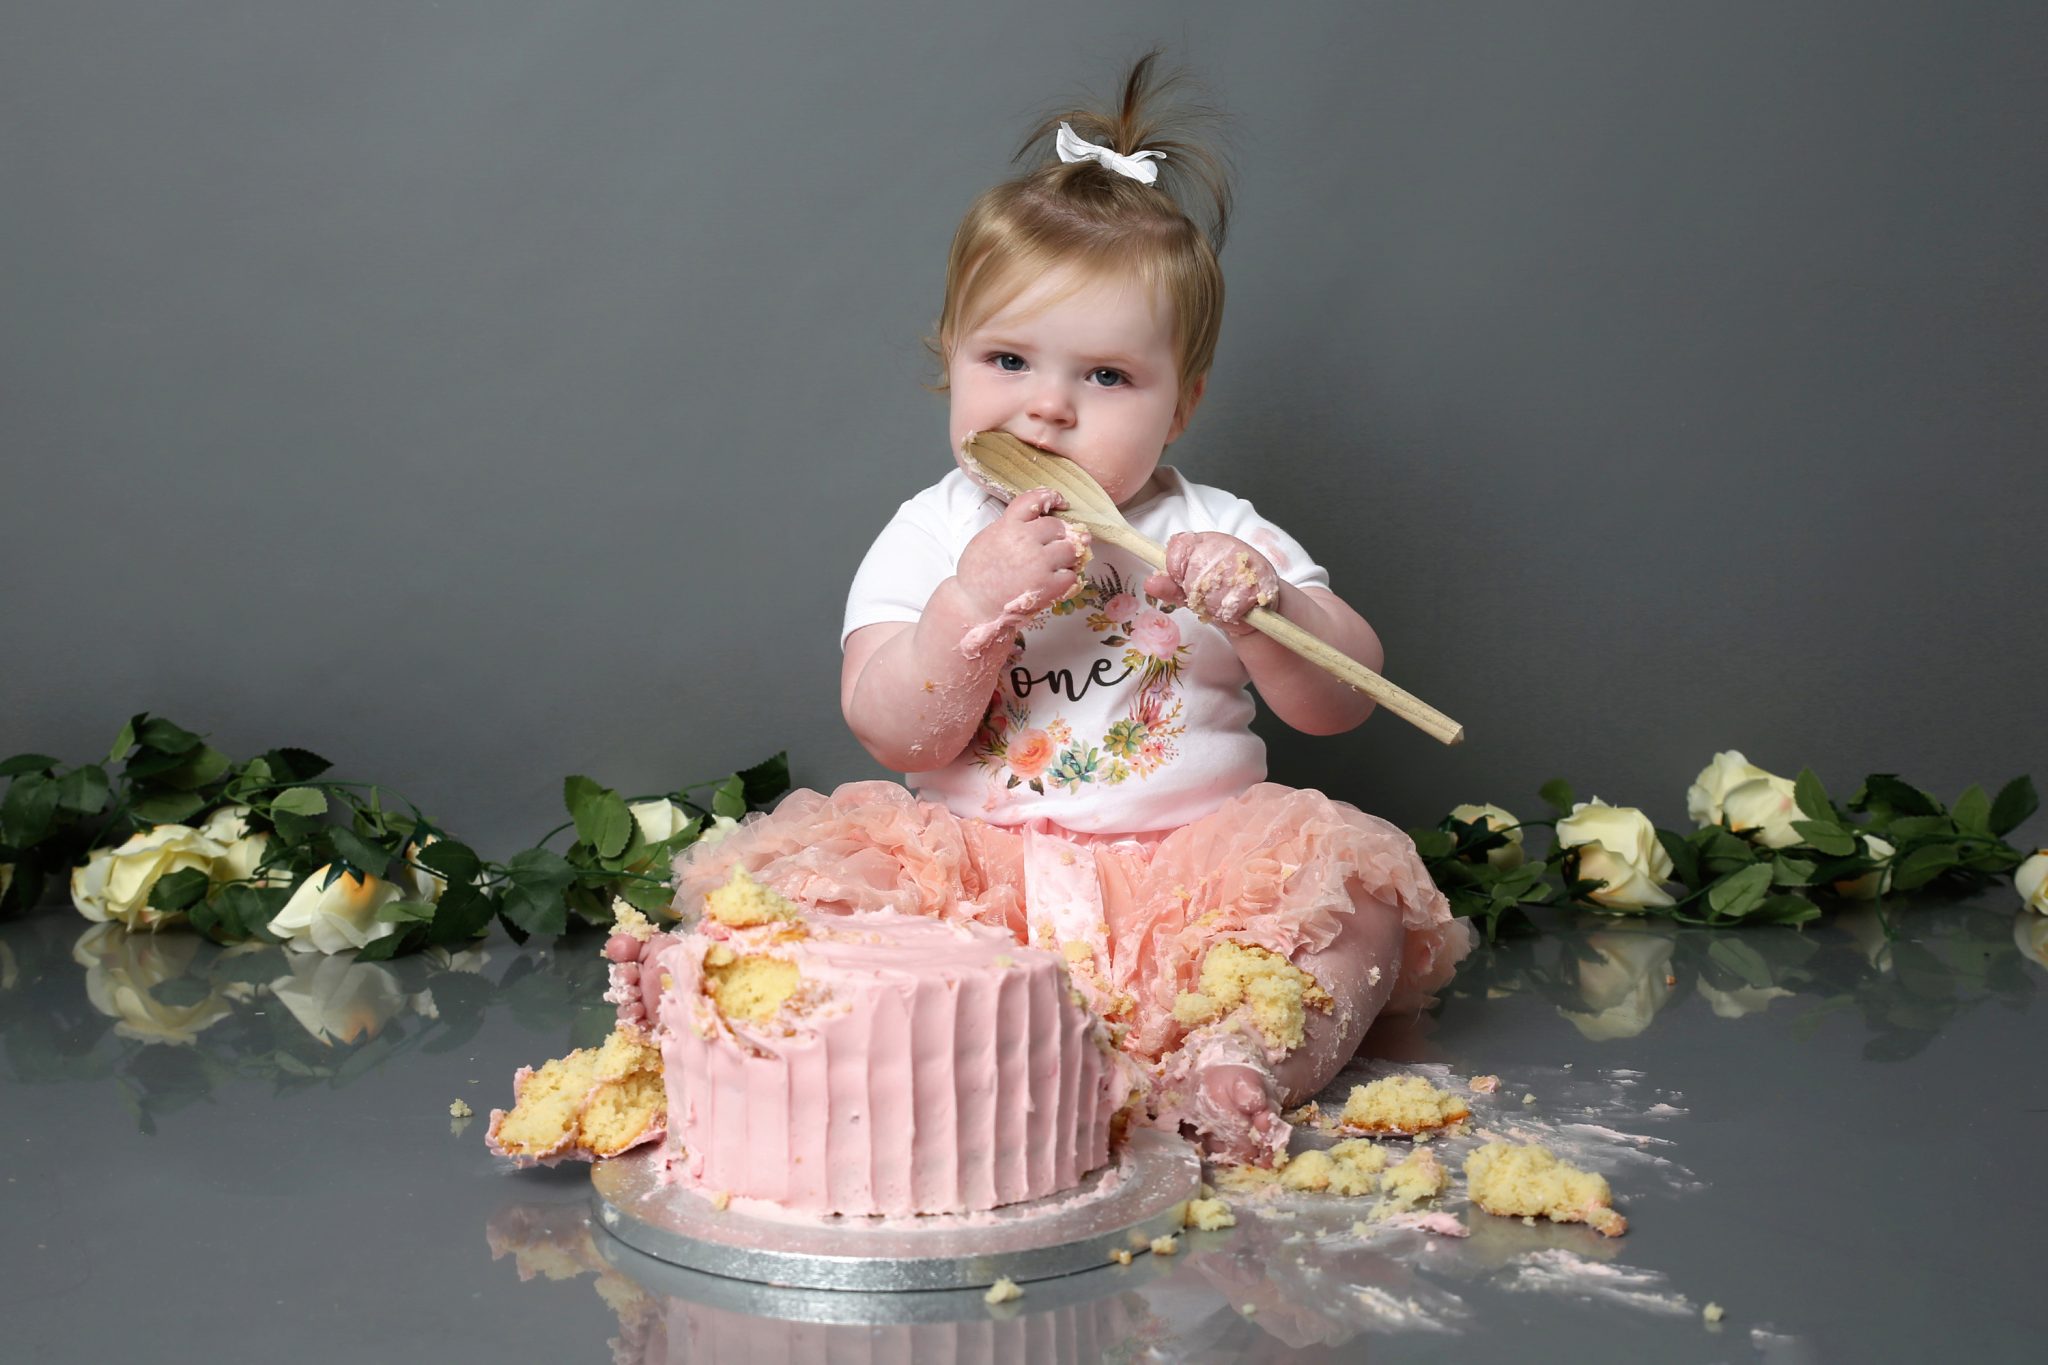 Little girl eating cake of wooden spoon sitting with pink cake with floral prop at cake smash photoshoot West Sussex